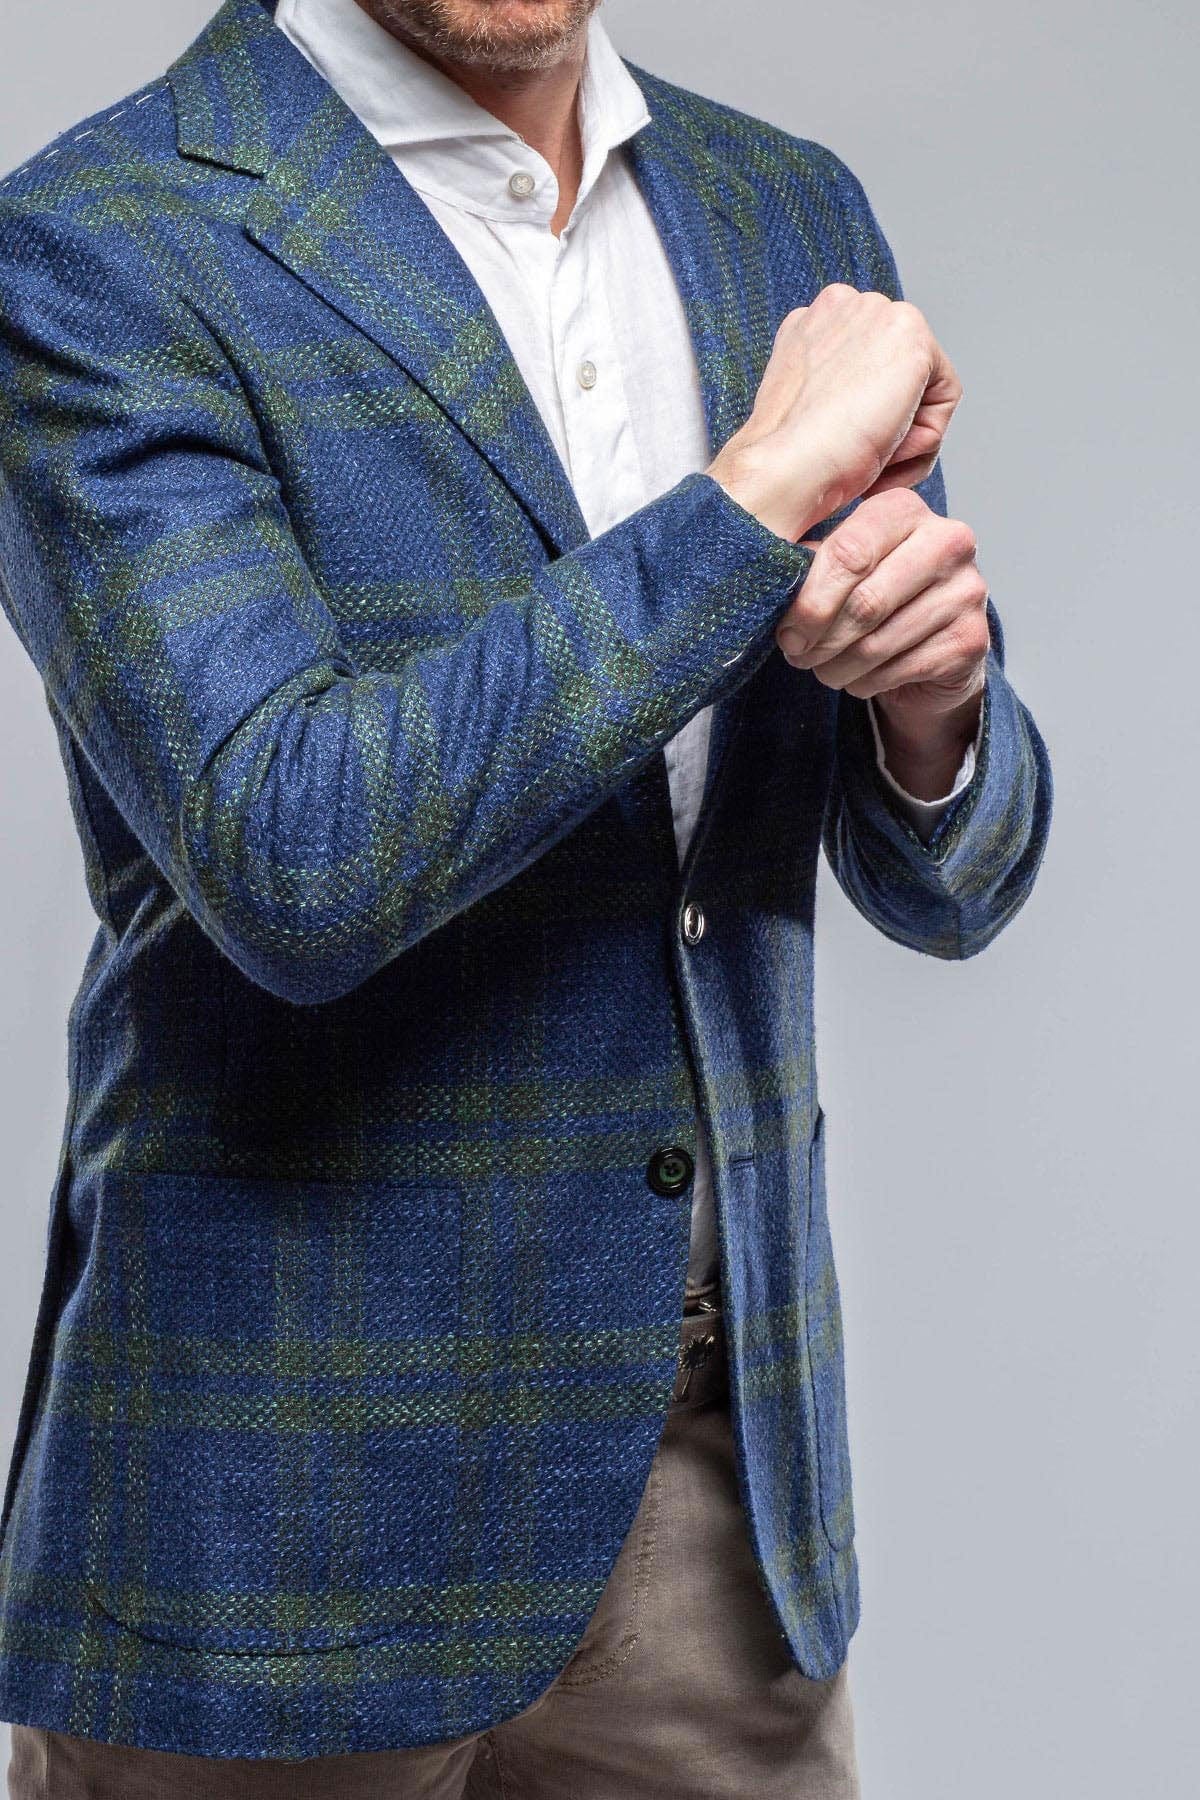 Elko Cashmere Sport Coat in Blue and Green - AXEL'S